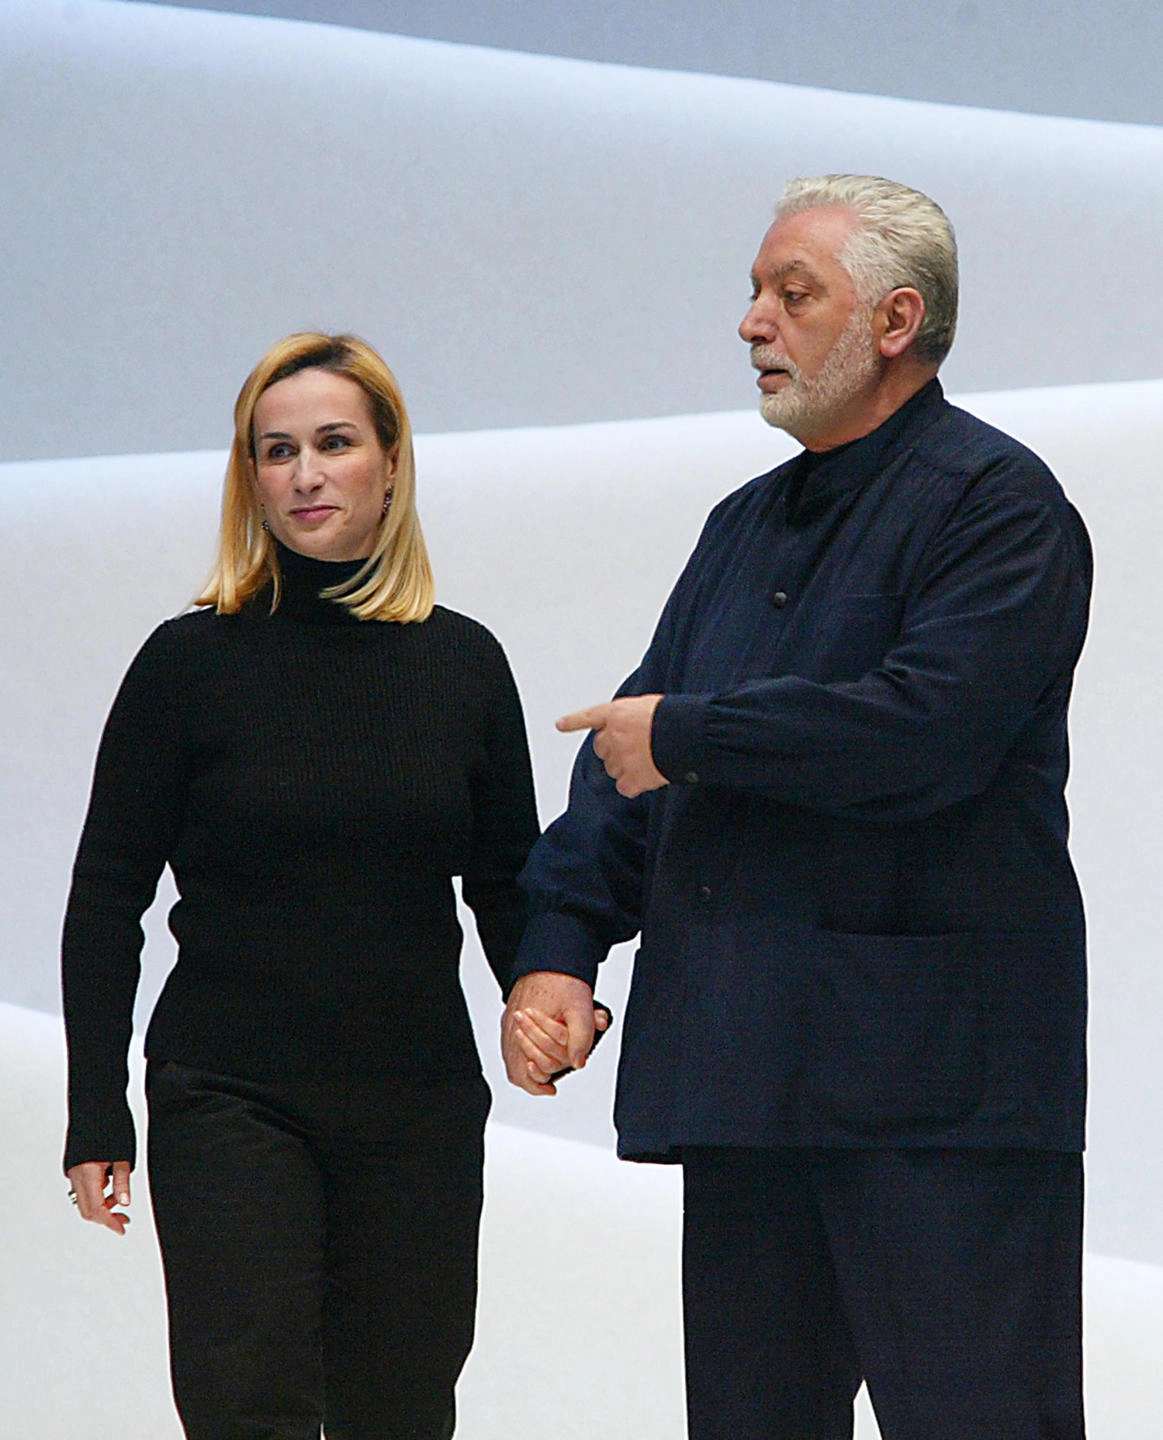 (FILES) In this file photo taken on March 11, 2002, Spanish designer Paco Rabanne (R) acknowledges the audience and his design partner Rosemary Rodriguez (L) in Paris during the Autumn-Winter 2002/2003 ready-to-wear collections. - Spanish fashion designer Paco Rabanne, known for his eccentric clothing designs and for founding one of the world's best-known fragrance brands, died on Friday at the age of 88. Rabanne's death was confirmed to AFP by the parent company of his brand, who said he had "marked generations with his radical vision of fashion and his legacy will live on." (Photo by JEAN-PIERRE MULLER / AFP)